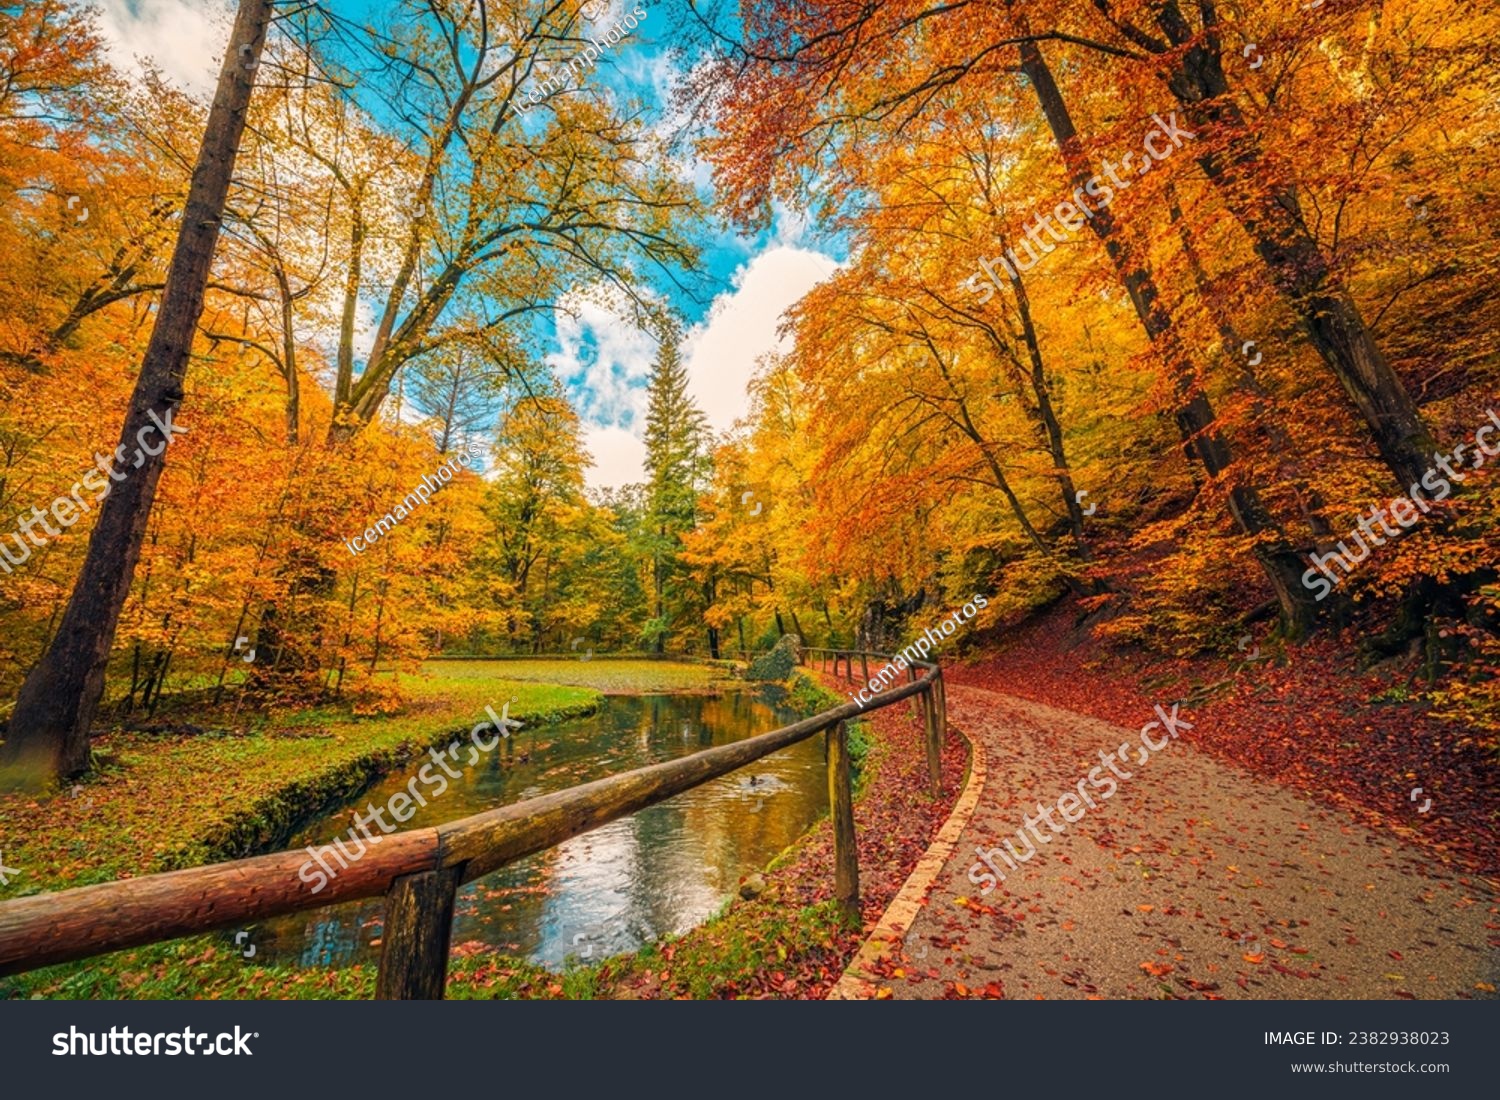 Mountain trail with calm lake, amazing autumn colors of leaves trees, sunny dream landscape. Beauty of nature concept background. Adventure hiking freedom stunning forest natural scene. Majestic view #2382938023